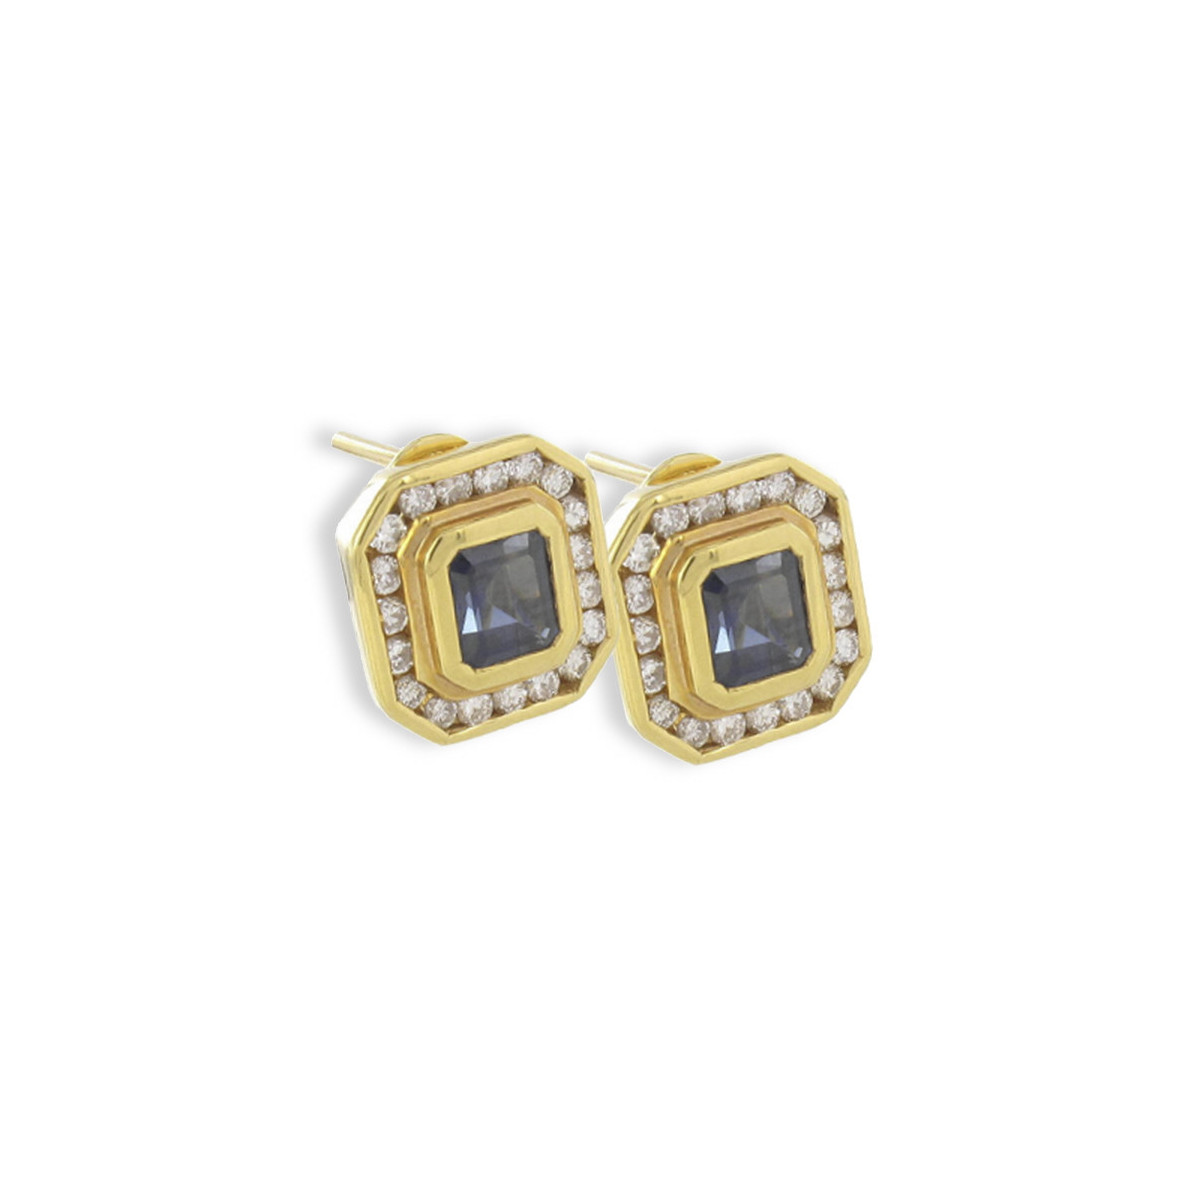 GOLD DIAMOND AND SAPPHIRE EARRING